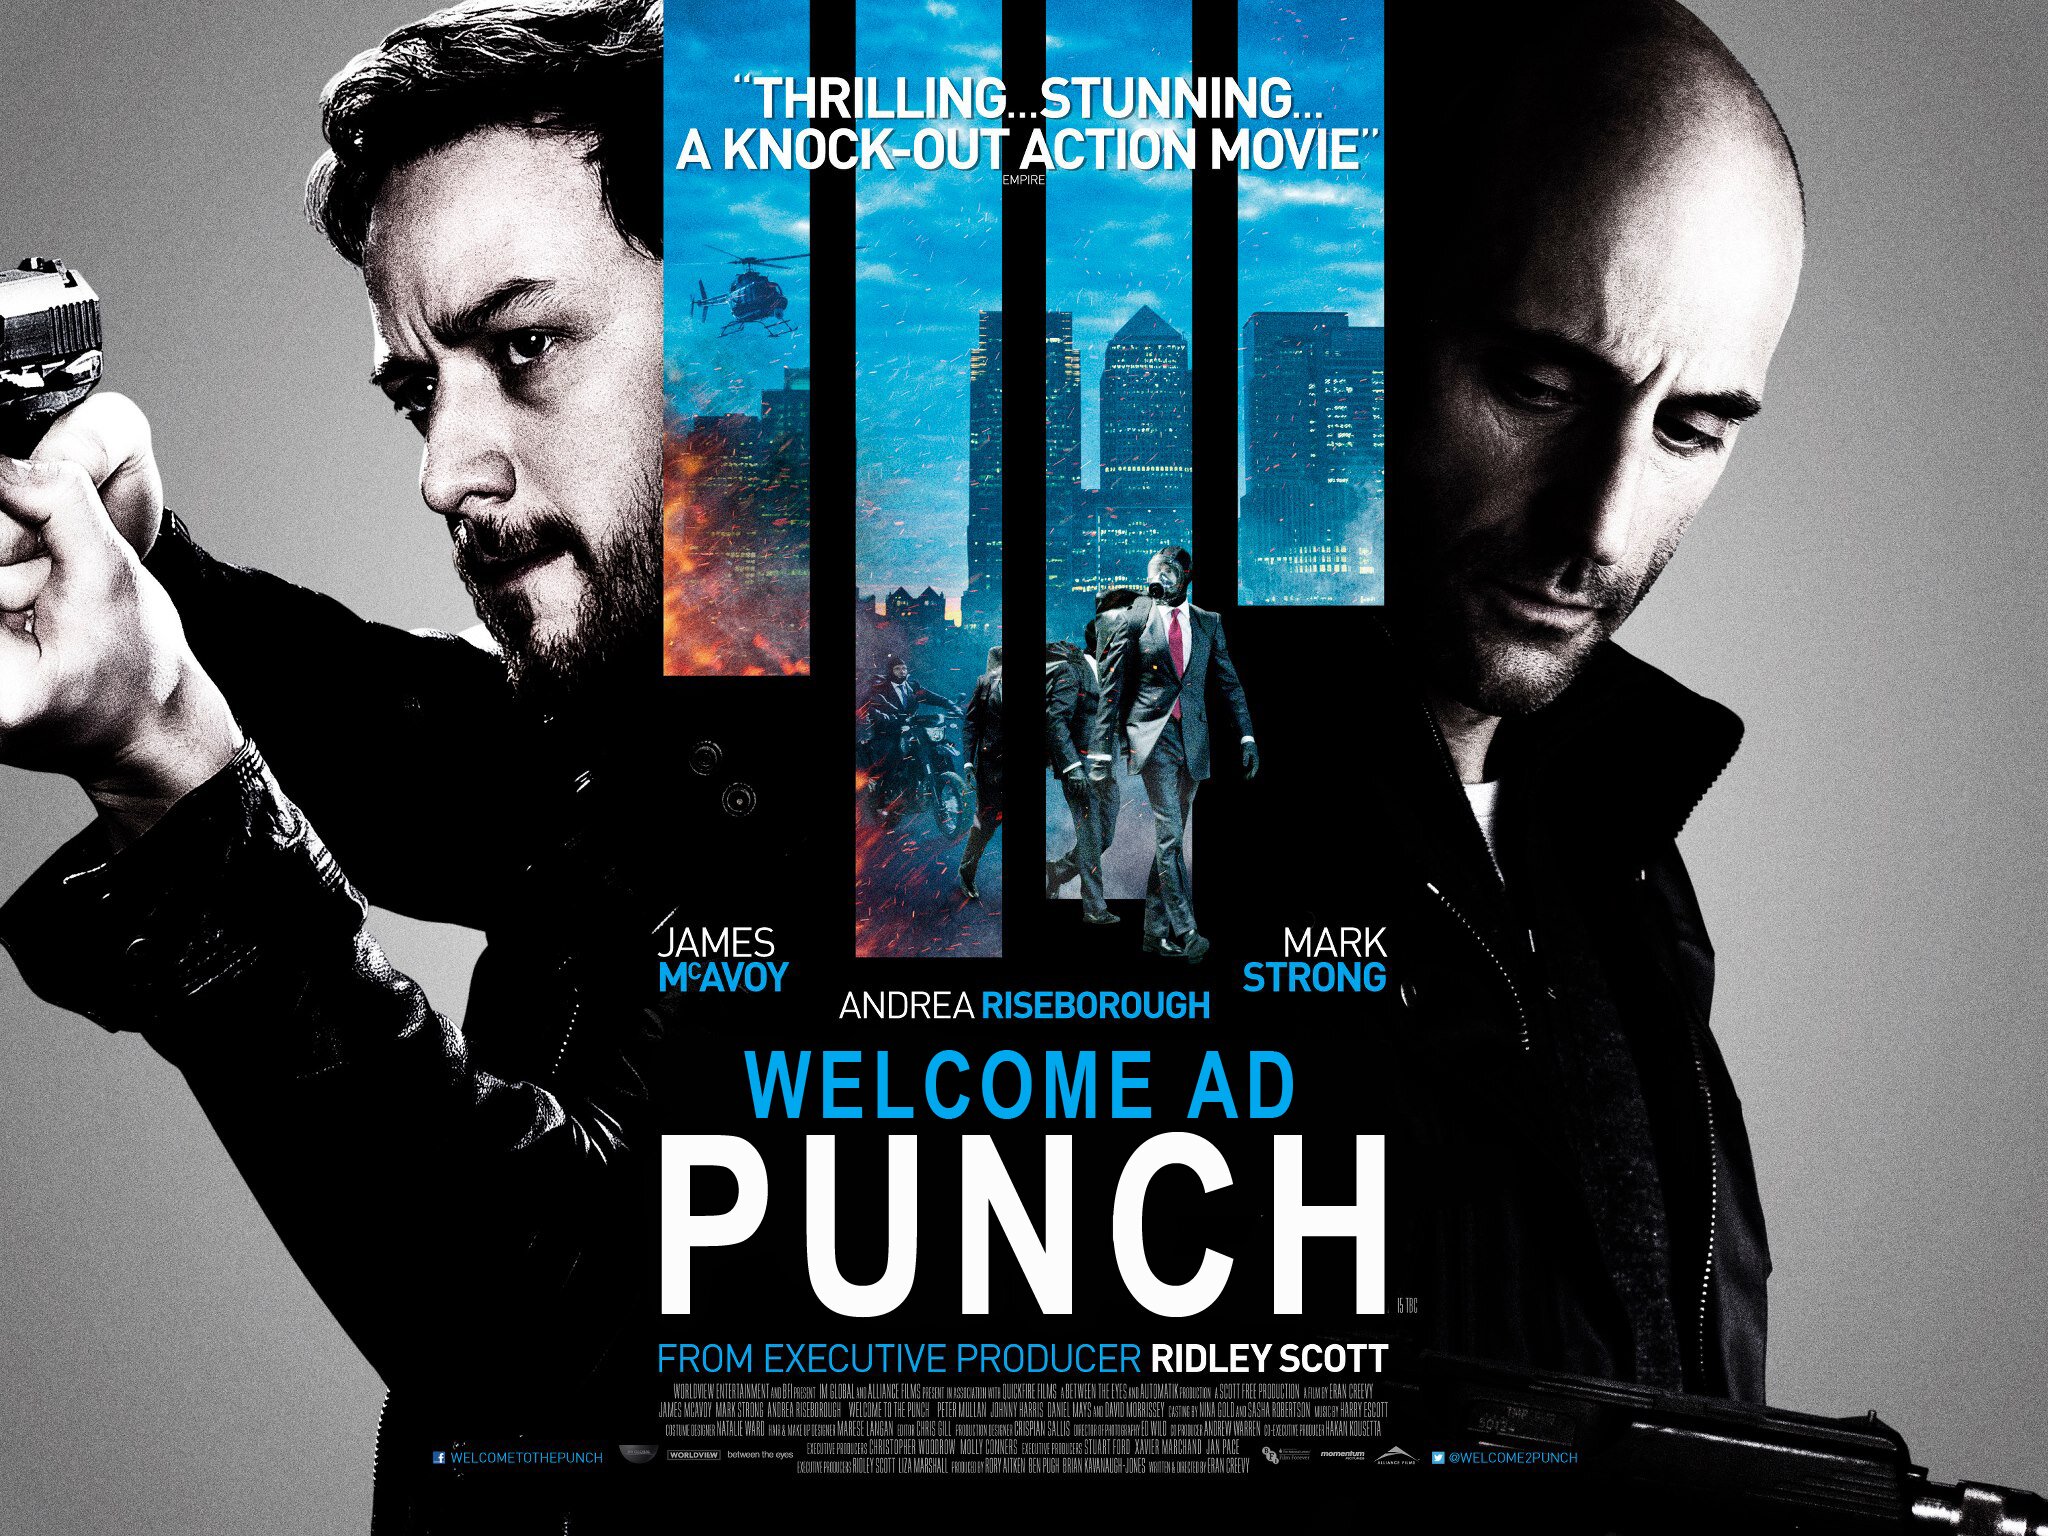 Welcome to the Punch poster